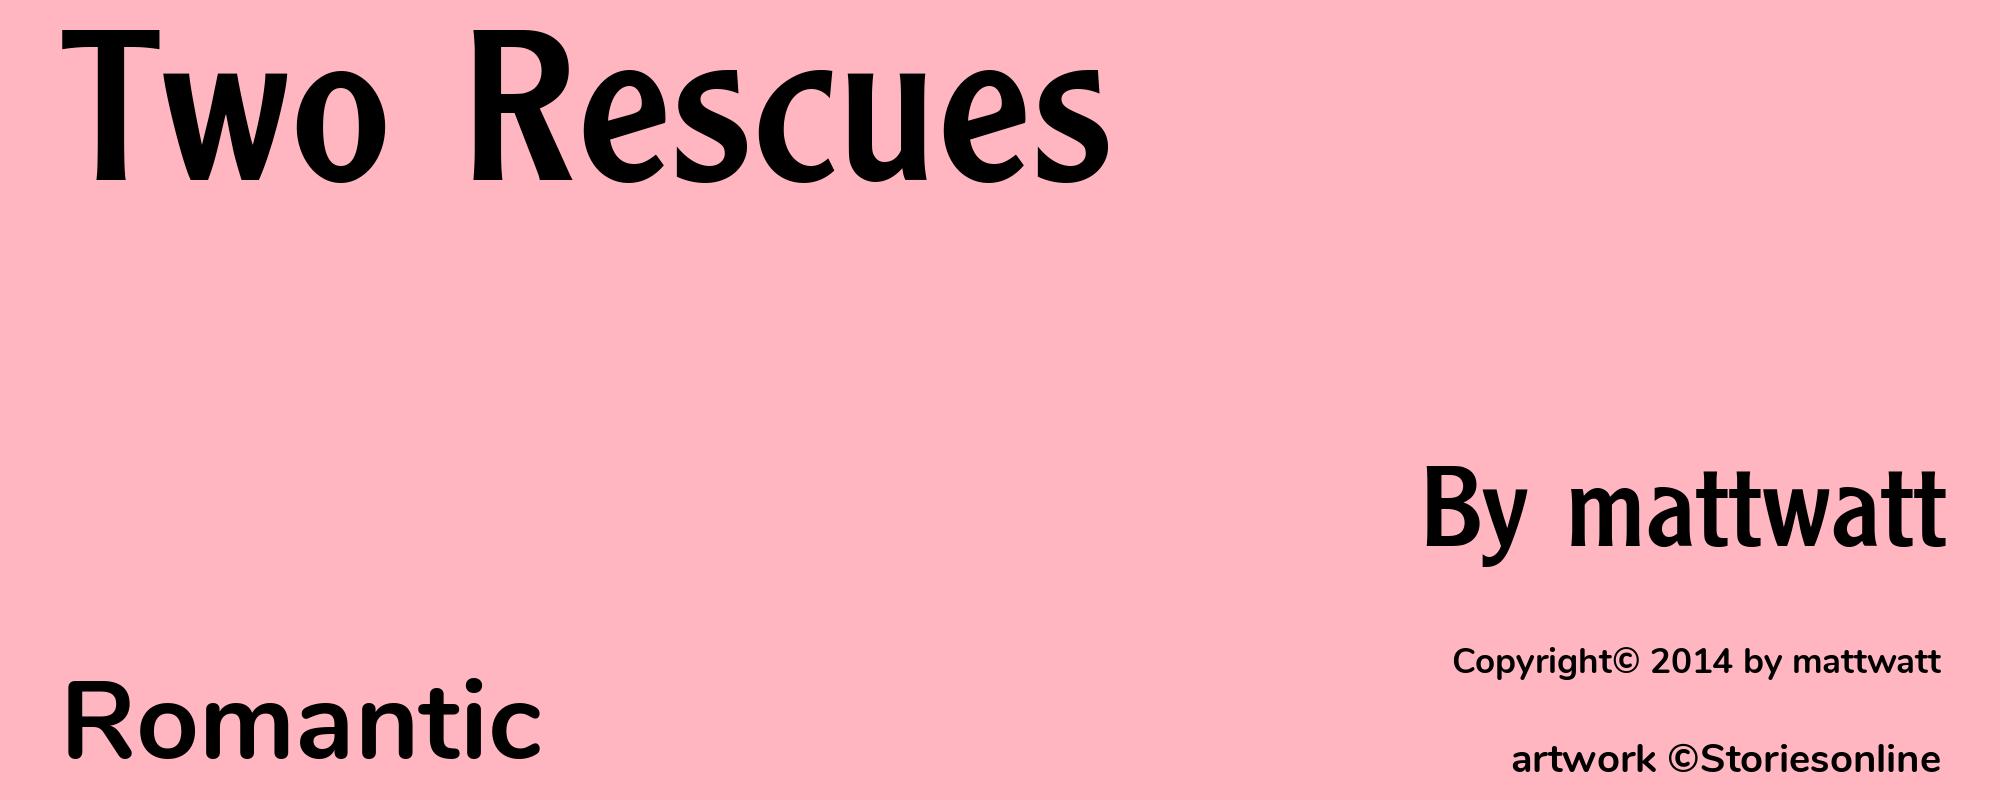 Two Rescues - Cover